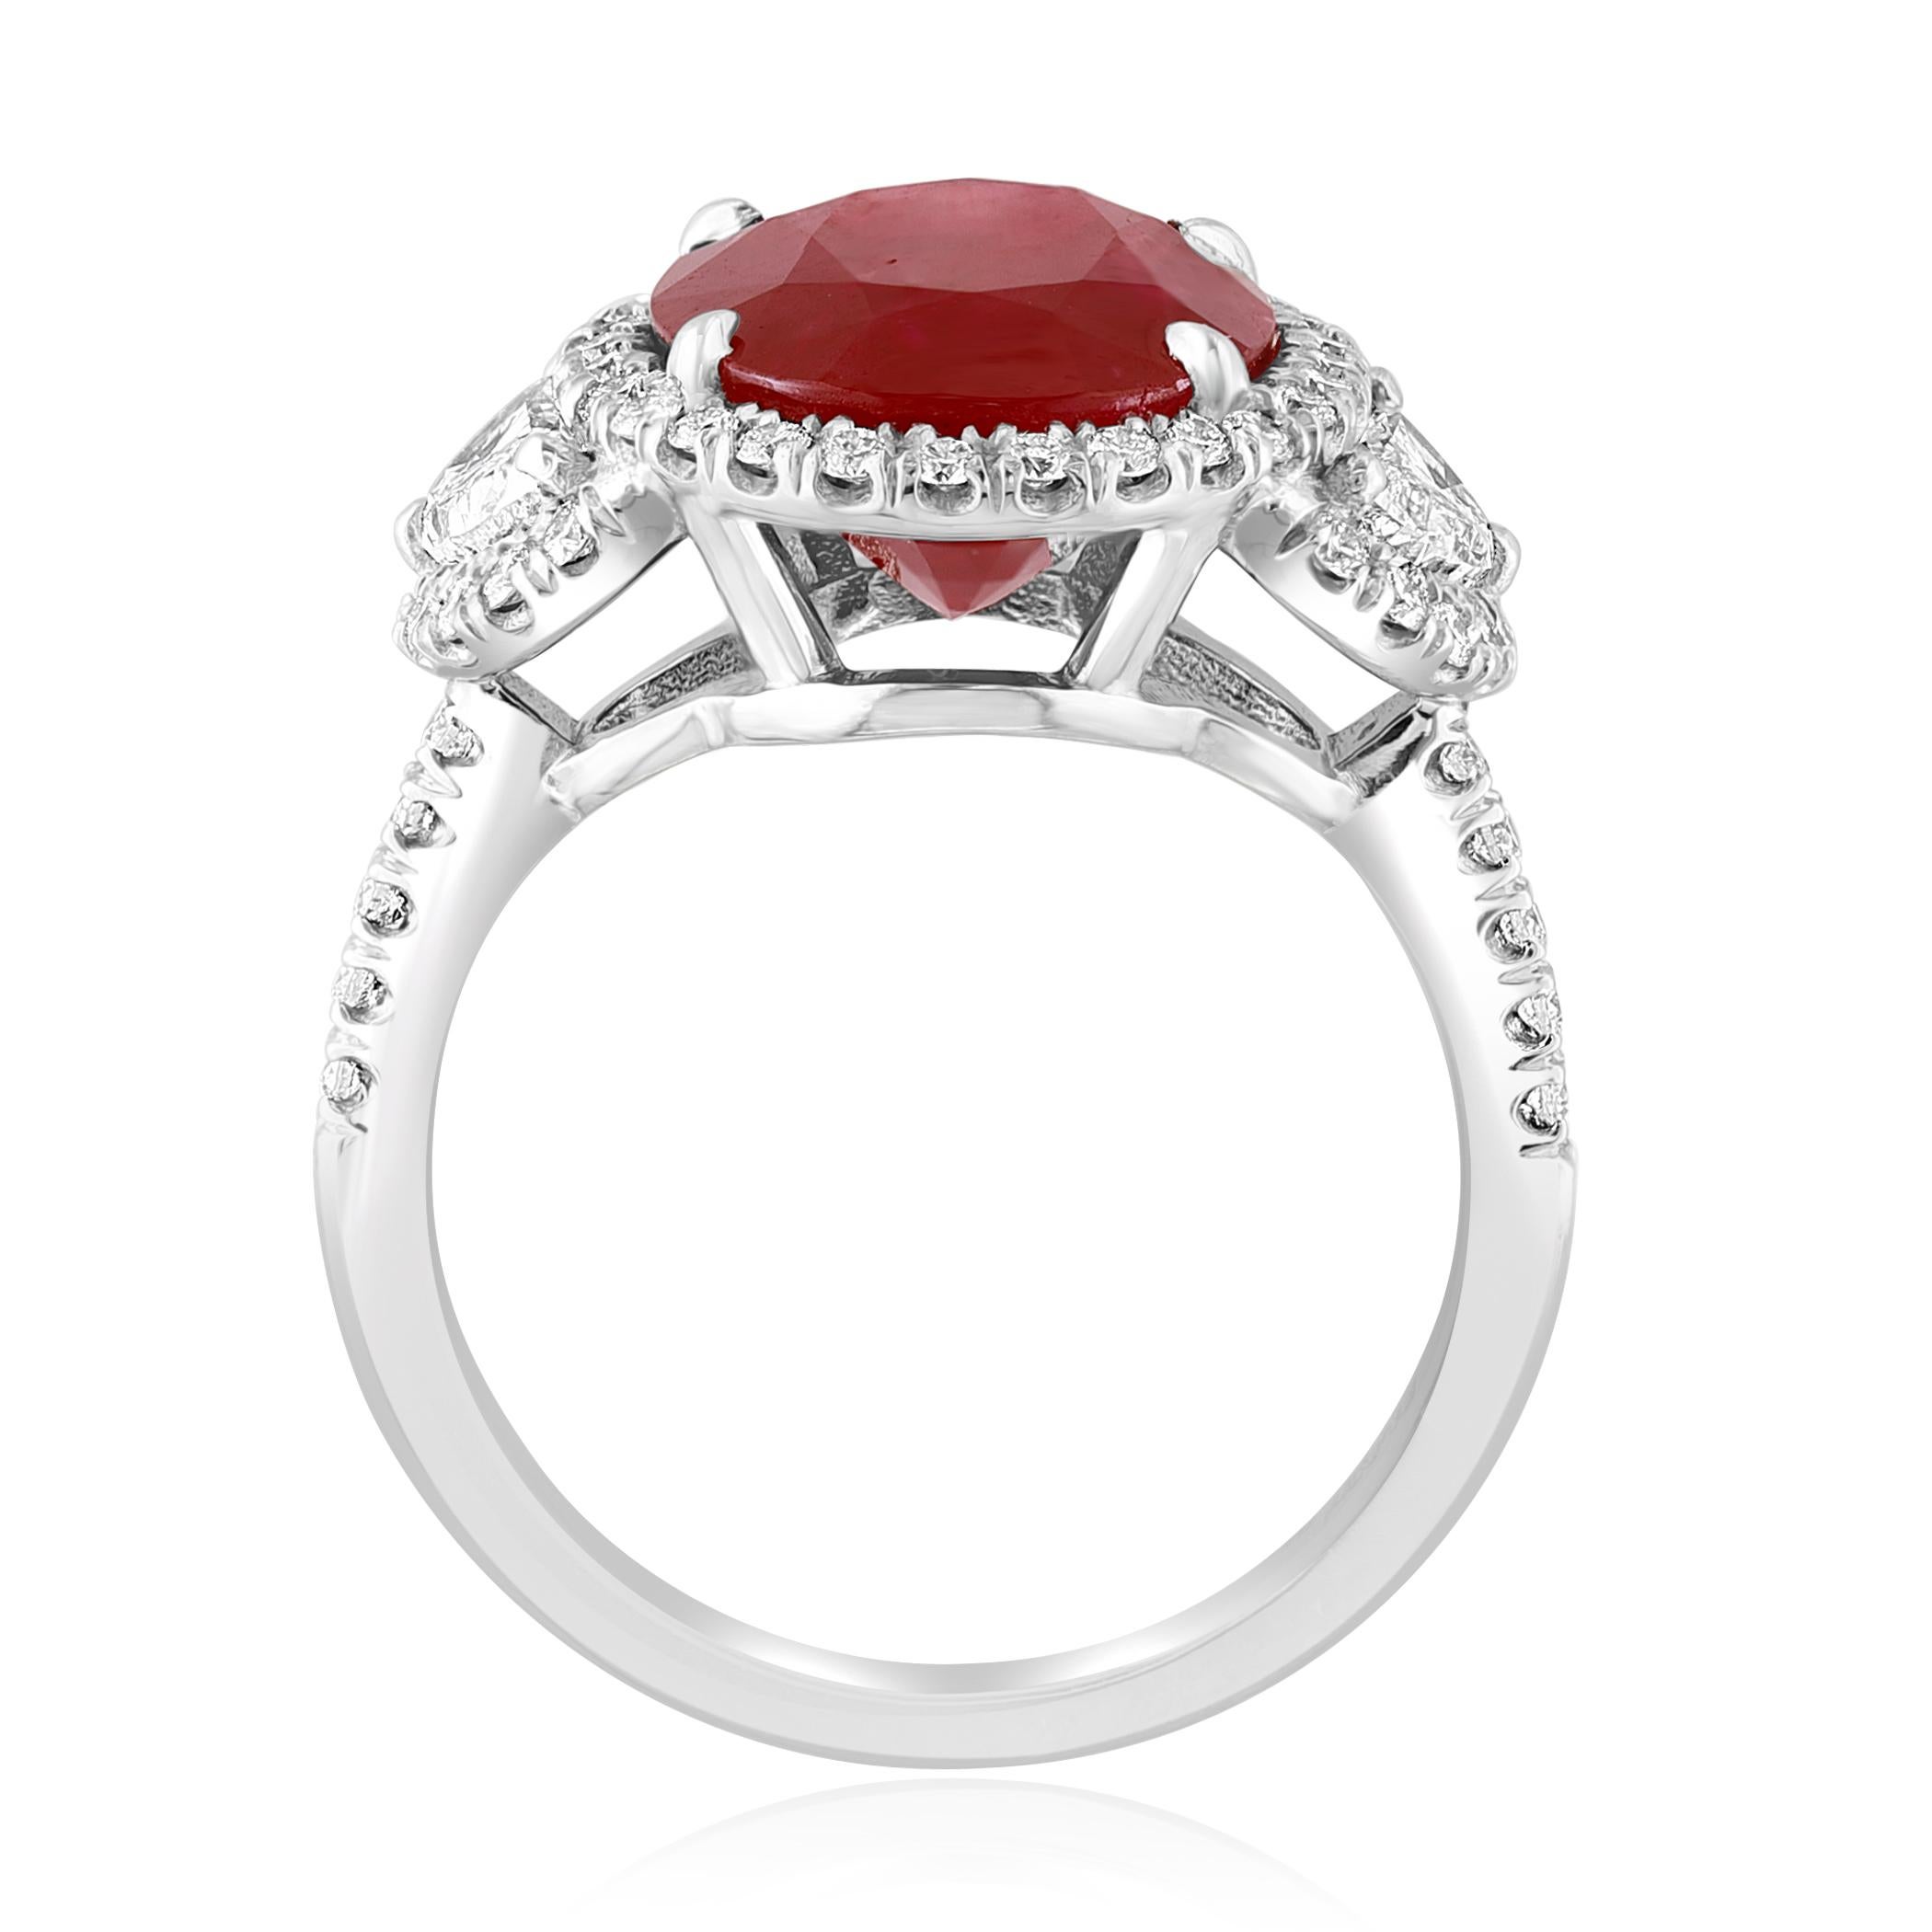 Modern Certified 6.05 Carat Oval Cut Ruby and Diamond Three-Stone Halo Ring in Platinum For Sale